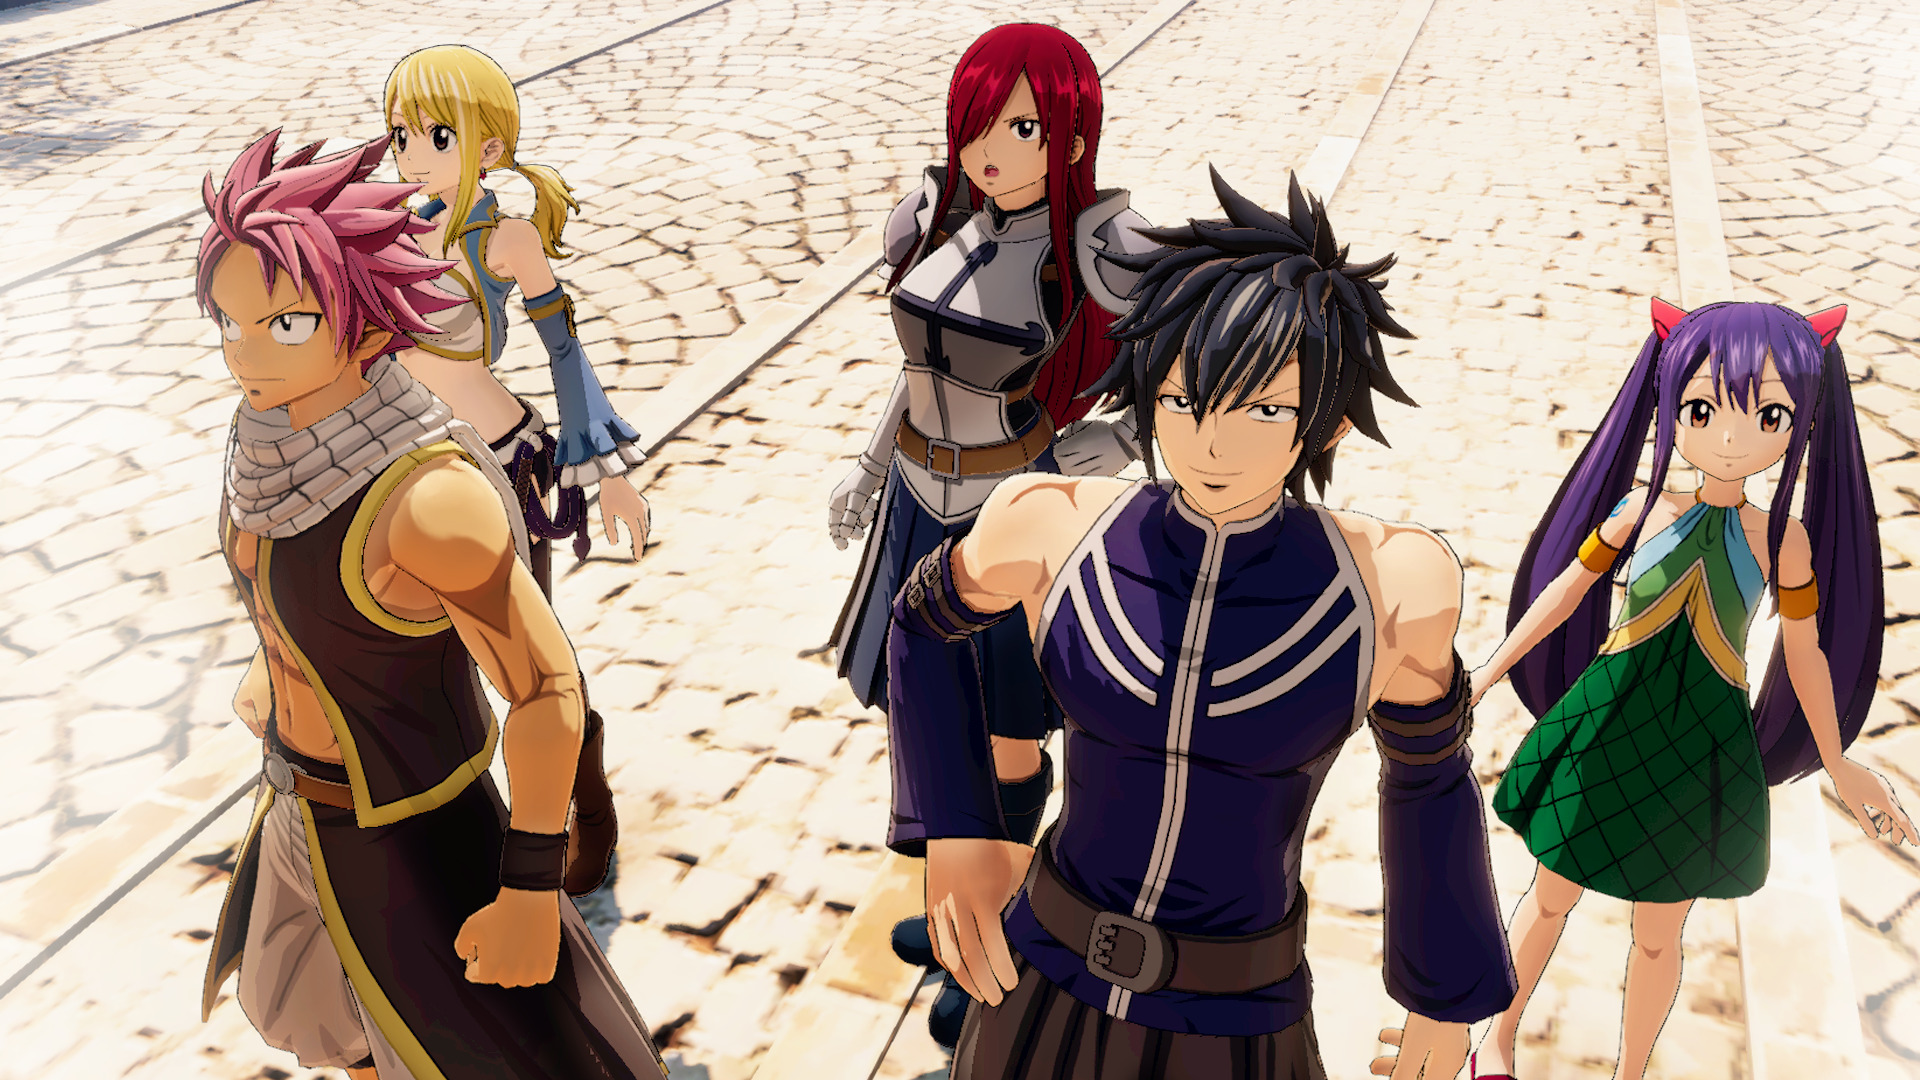 Why isn't Fairy Tail recognised as an excellent anime? - Quora